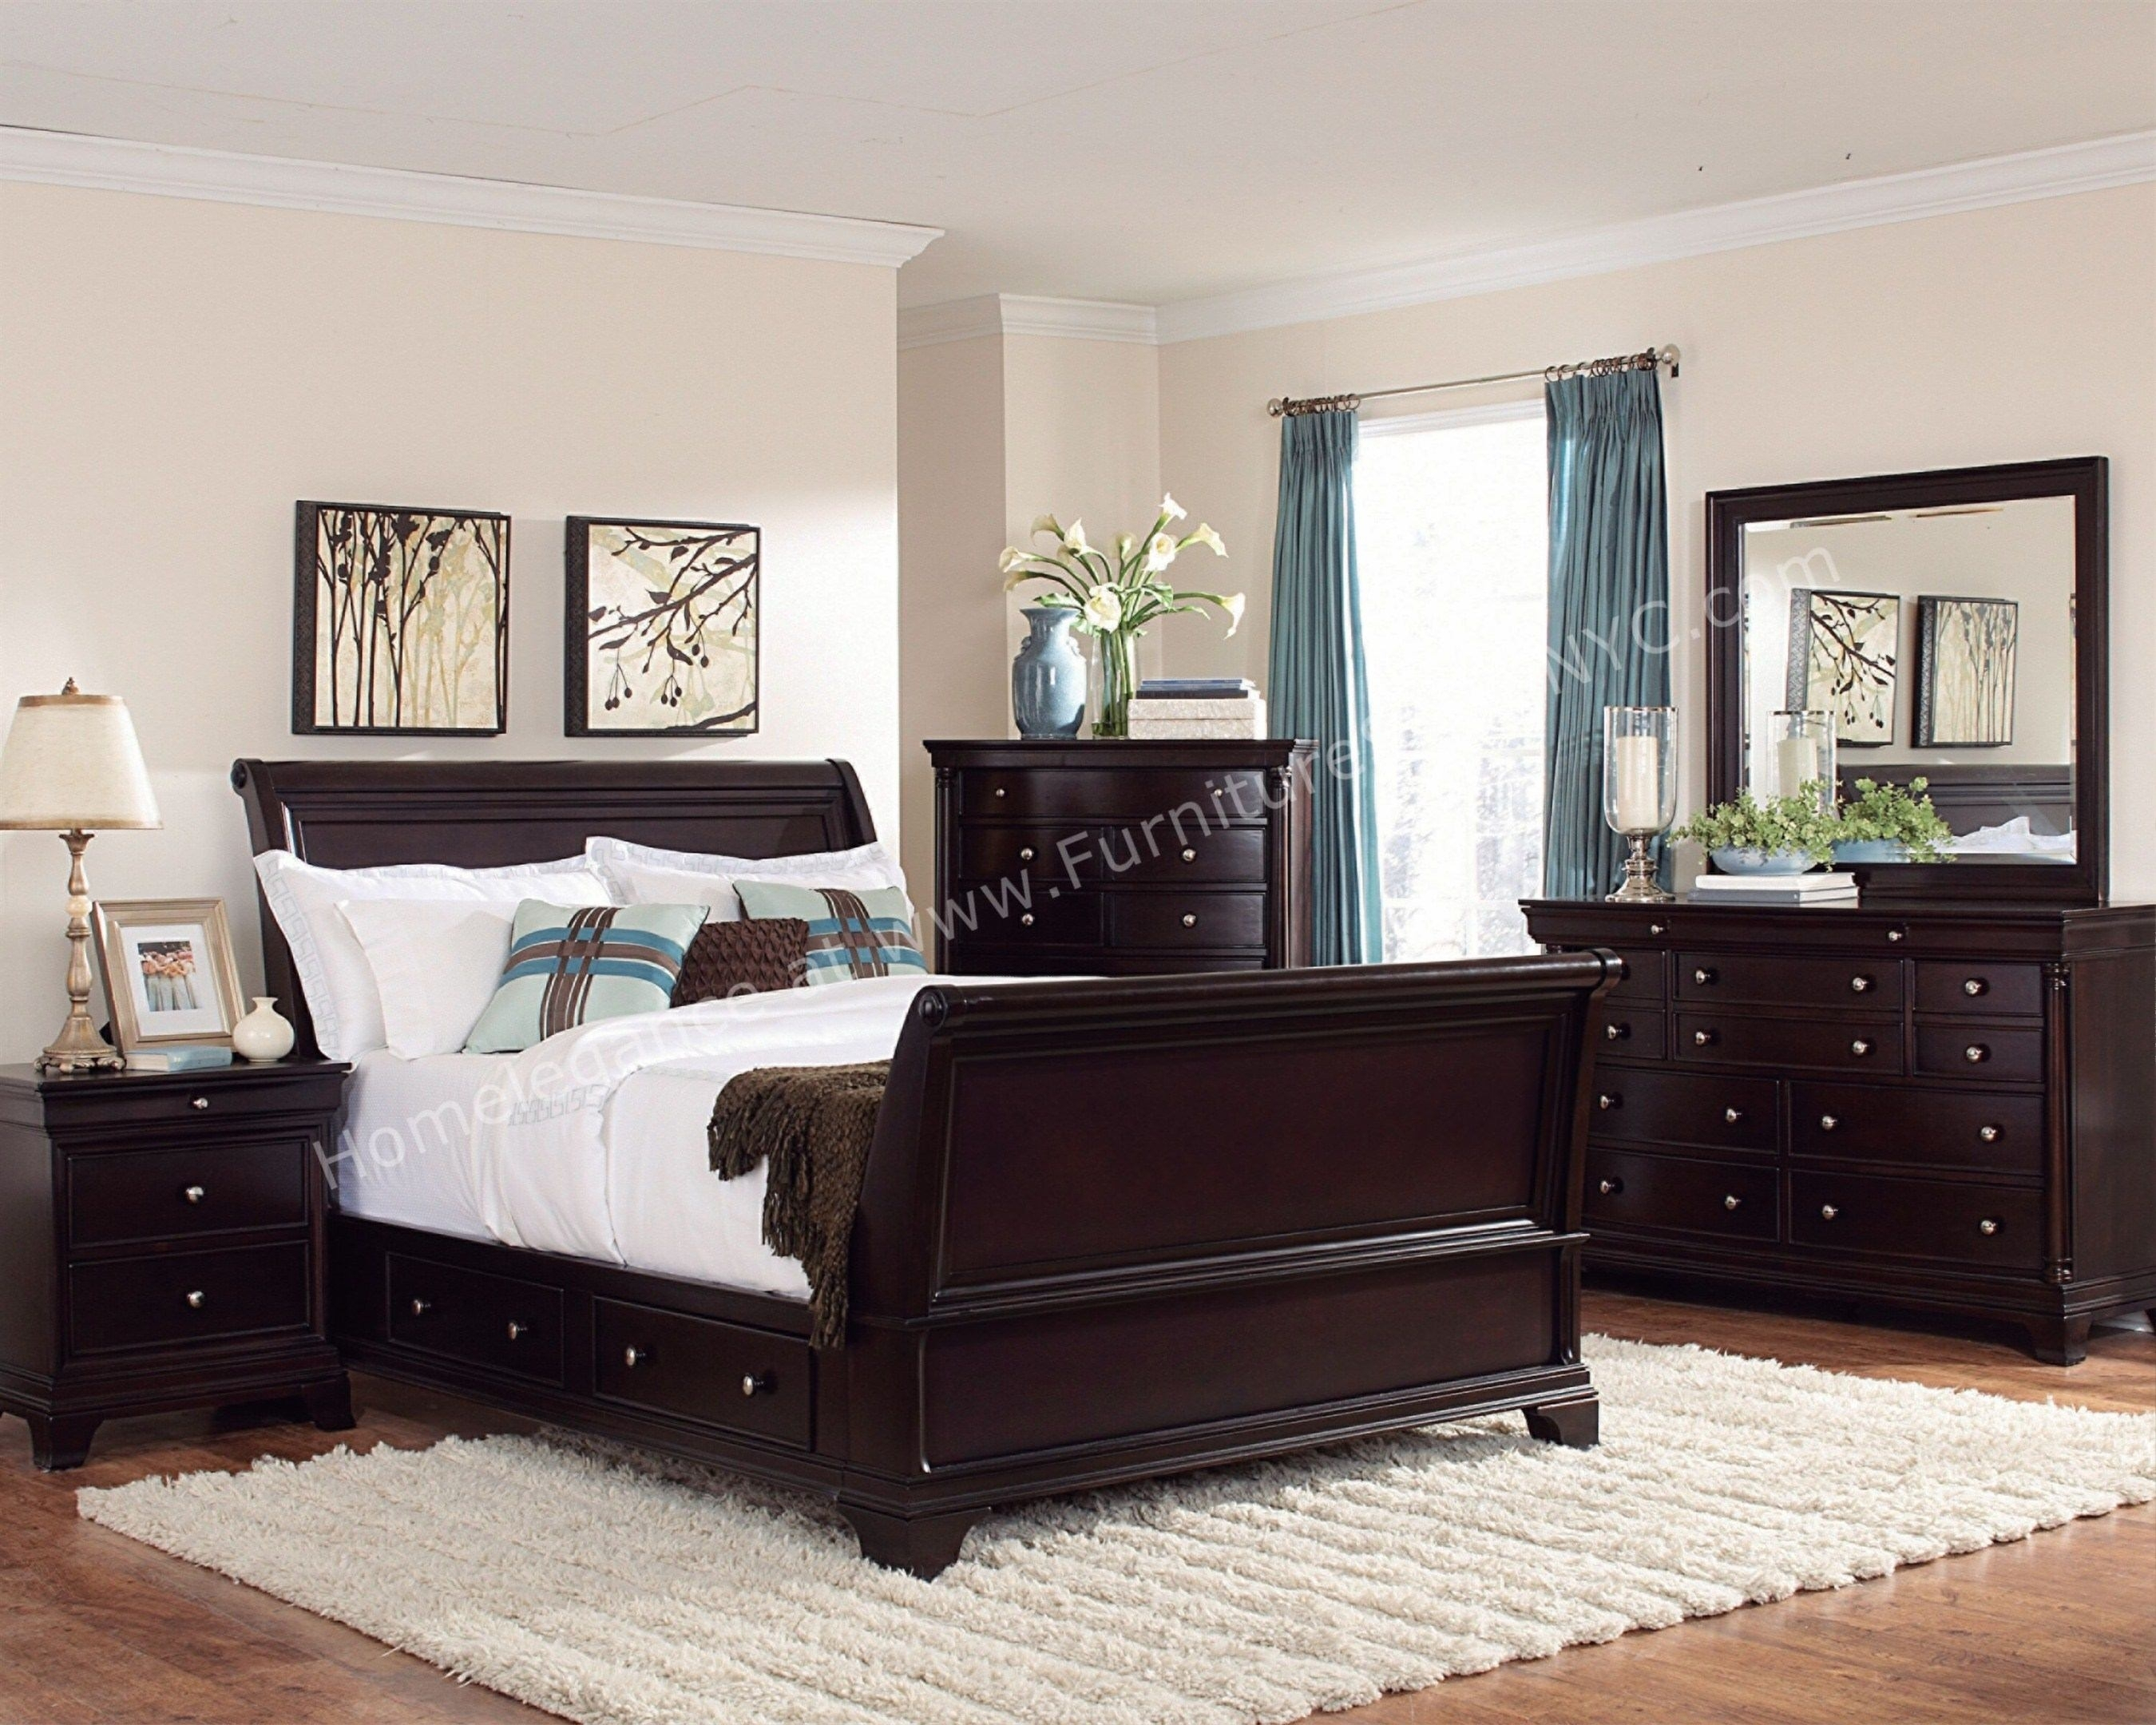 Modern Dark Wood Bedroom Furniture Cileather Home Design Ideas intended for dimensions 2700 X 2160